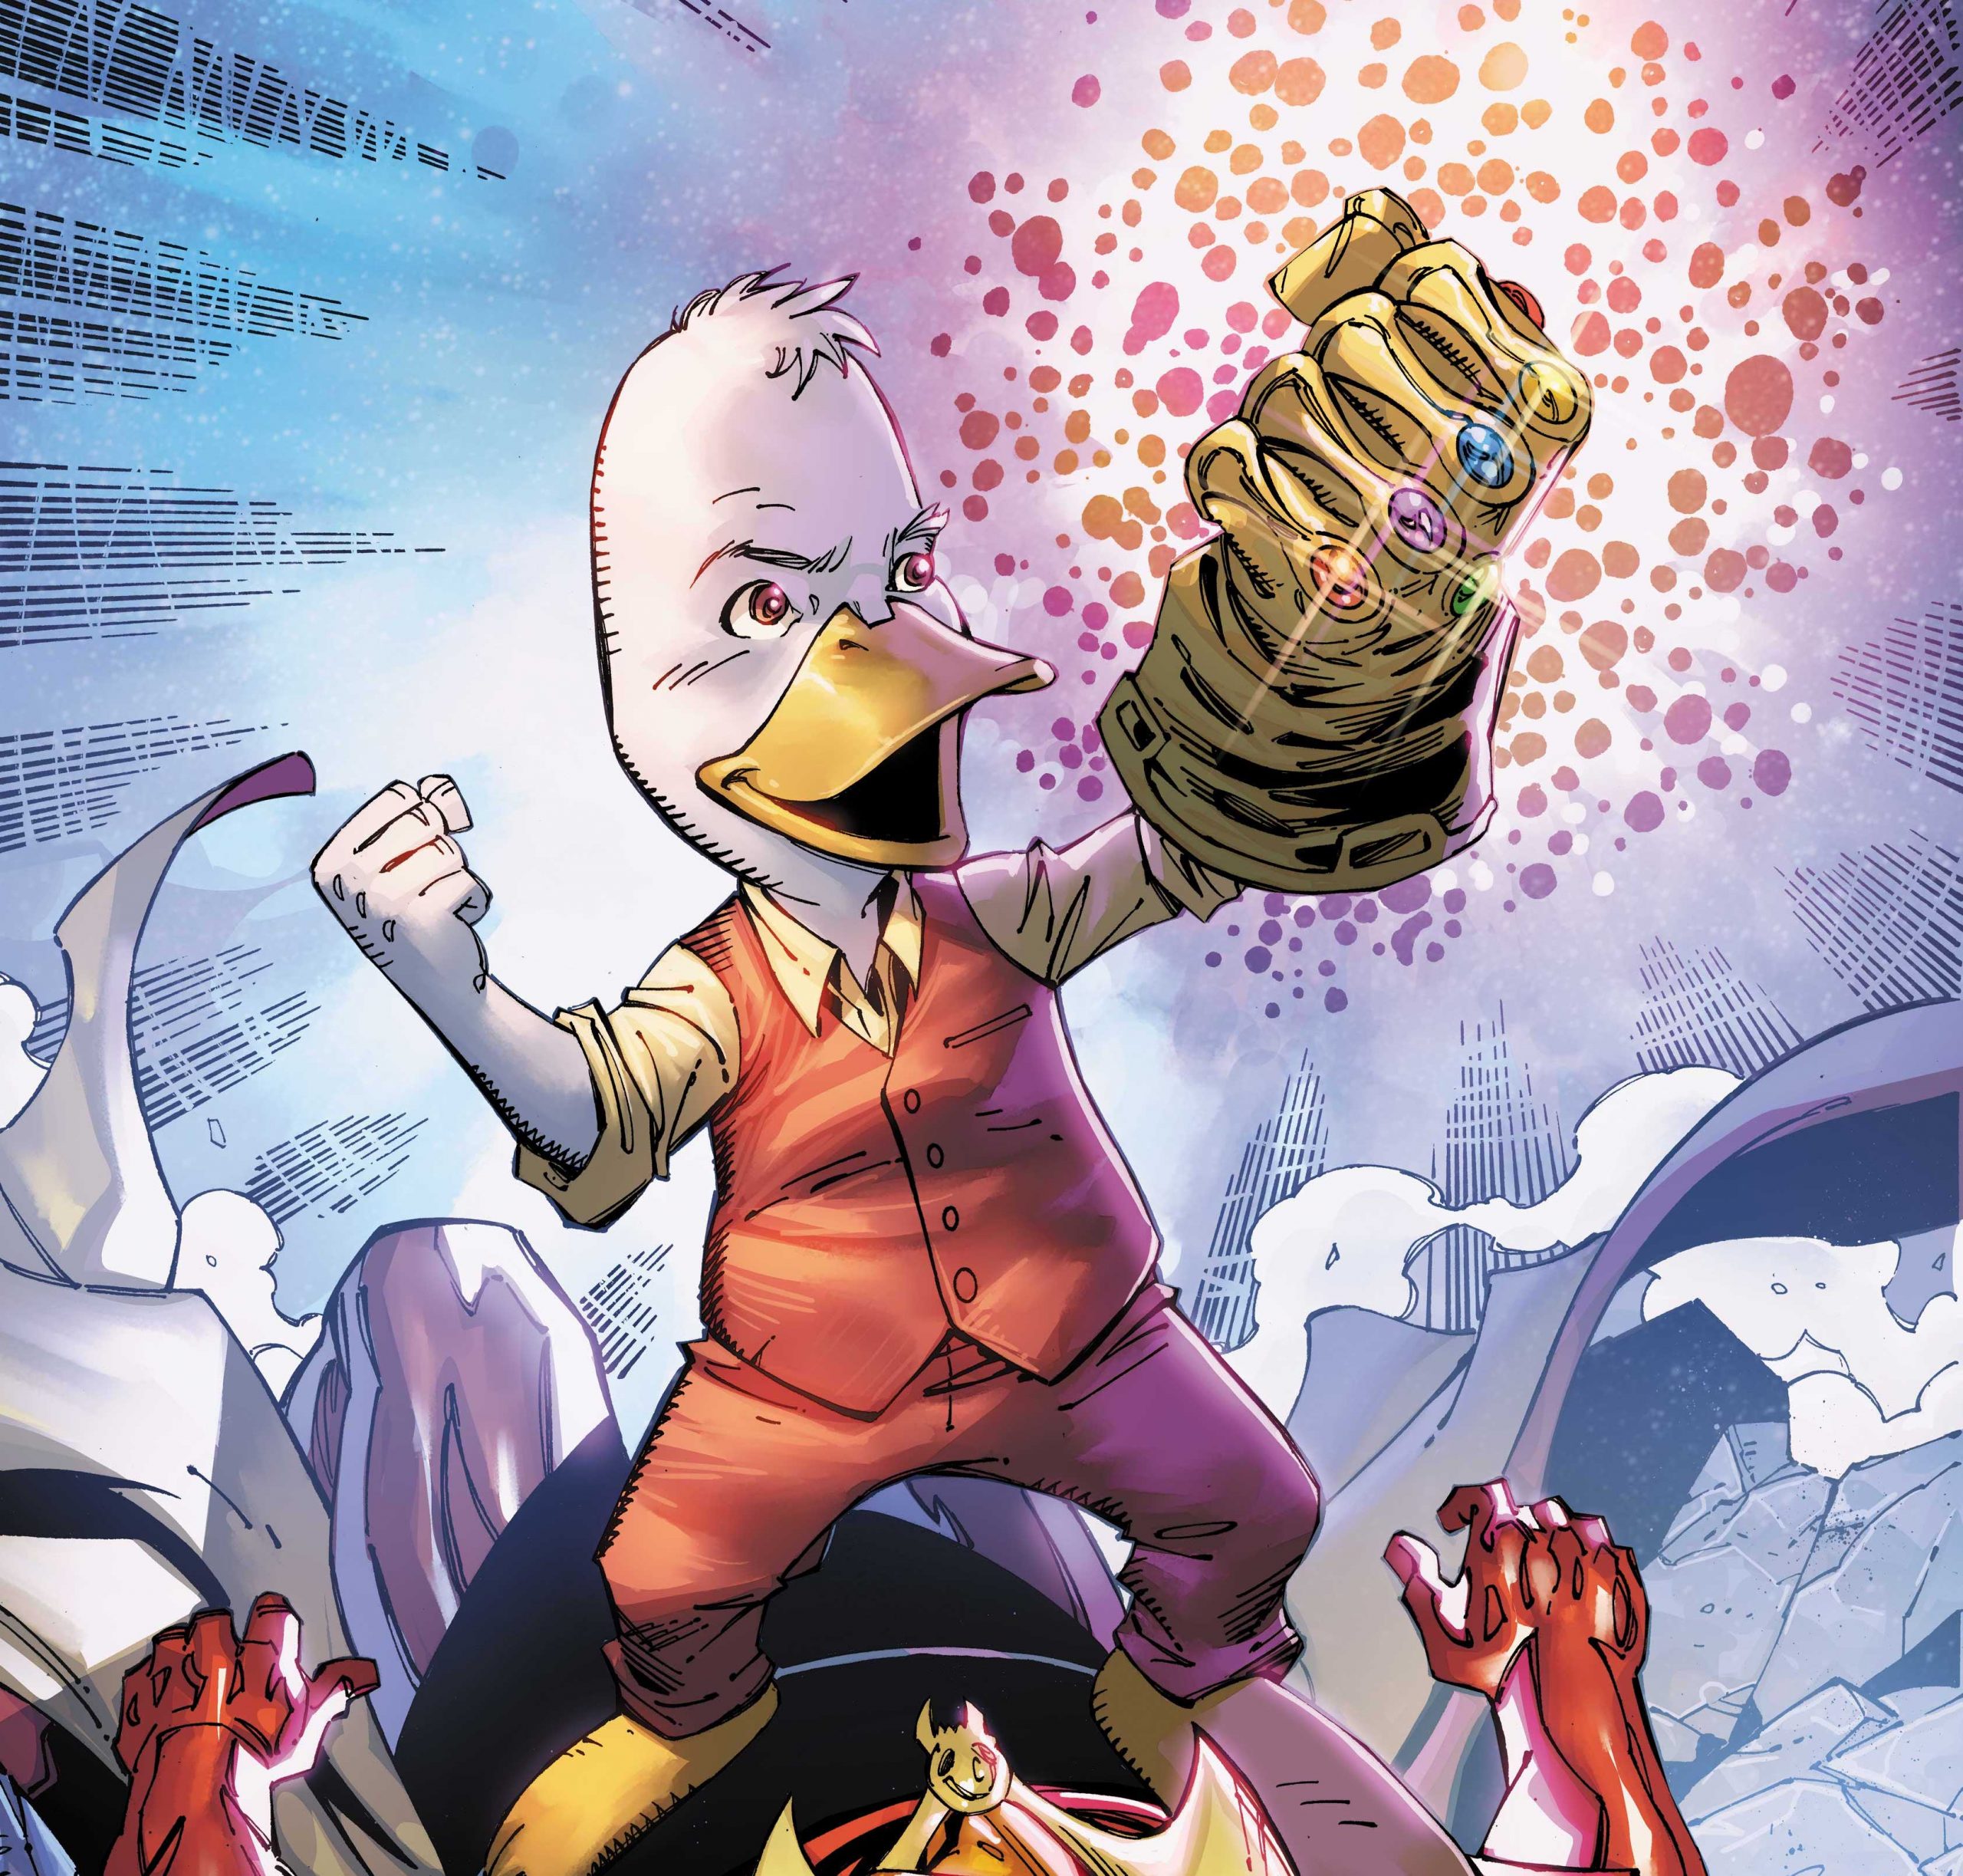 Howard the Duck invades Marvel via variant covers in February 2023